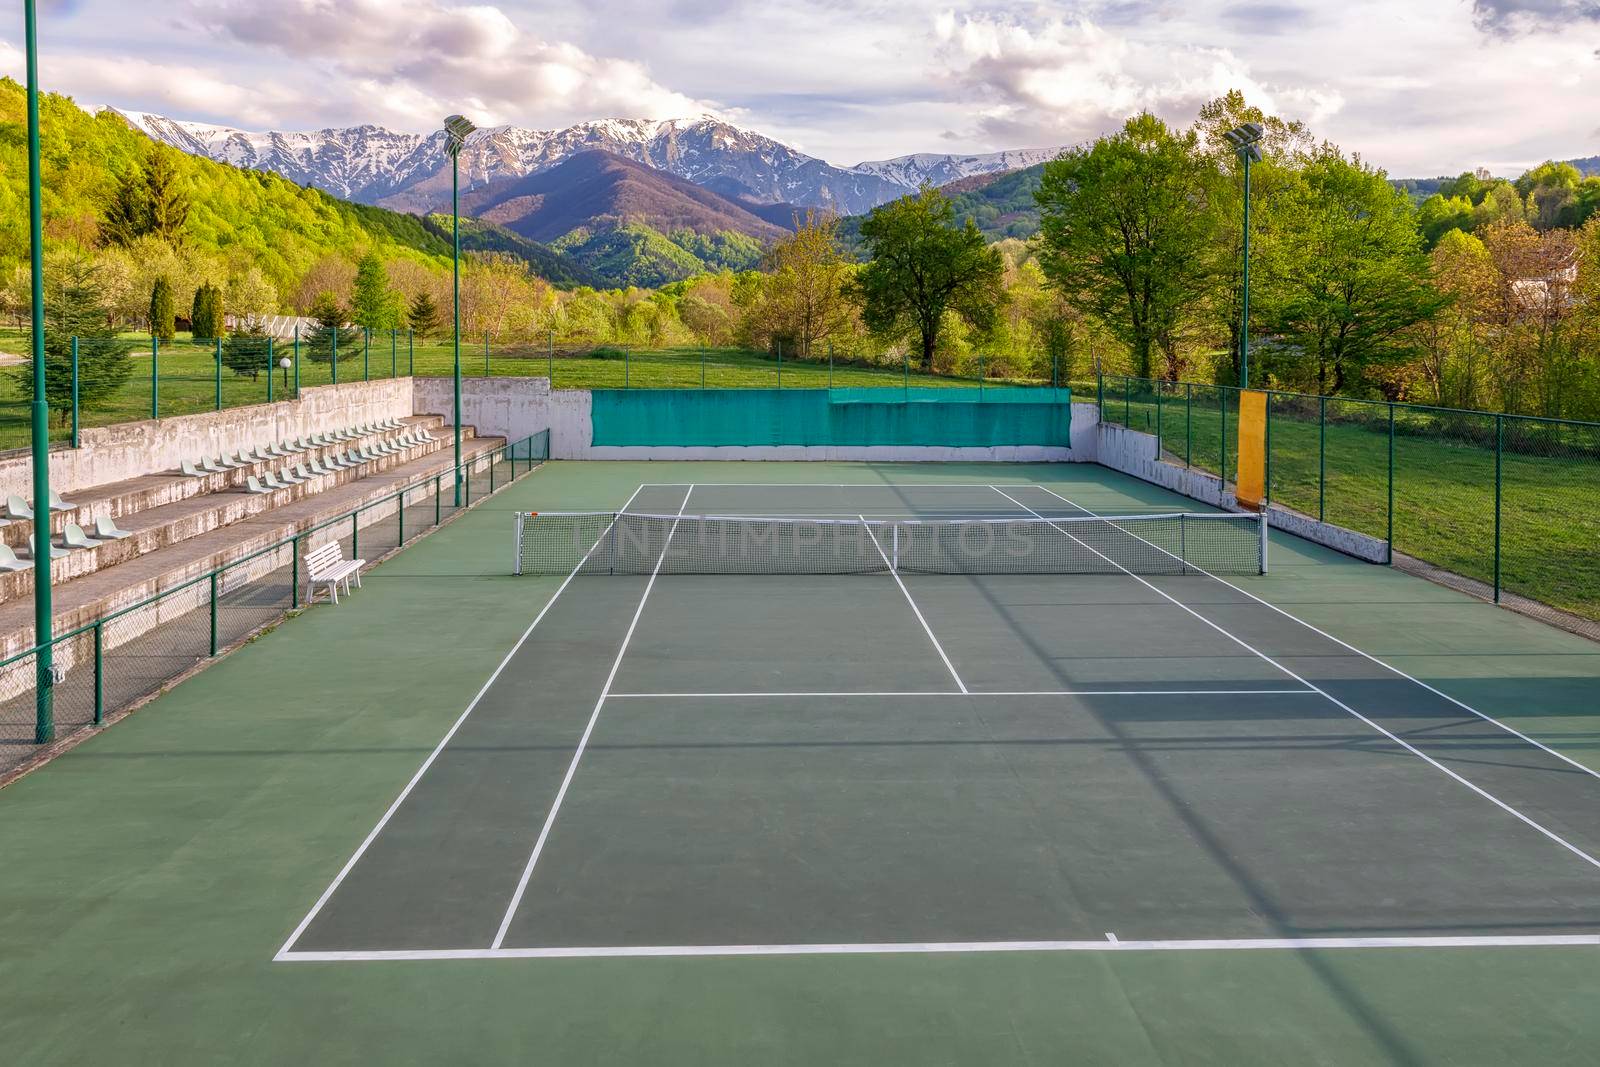 Tennis court. Trees and mountains around the tennis court in nature.